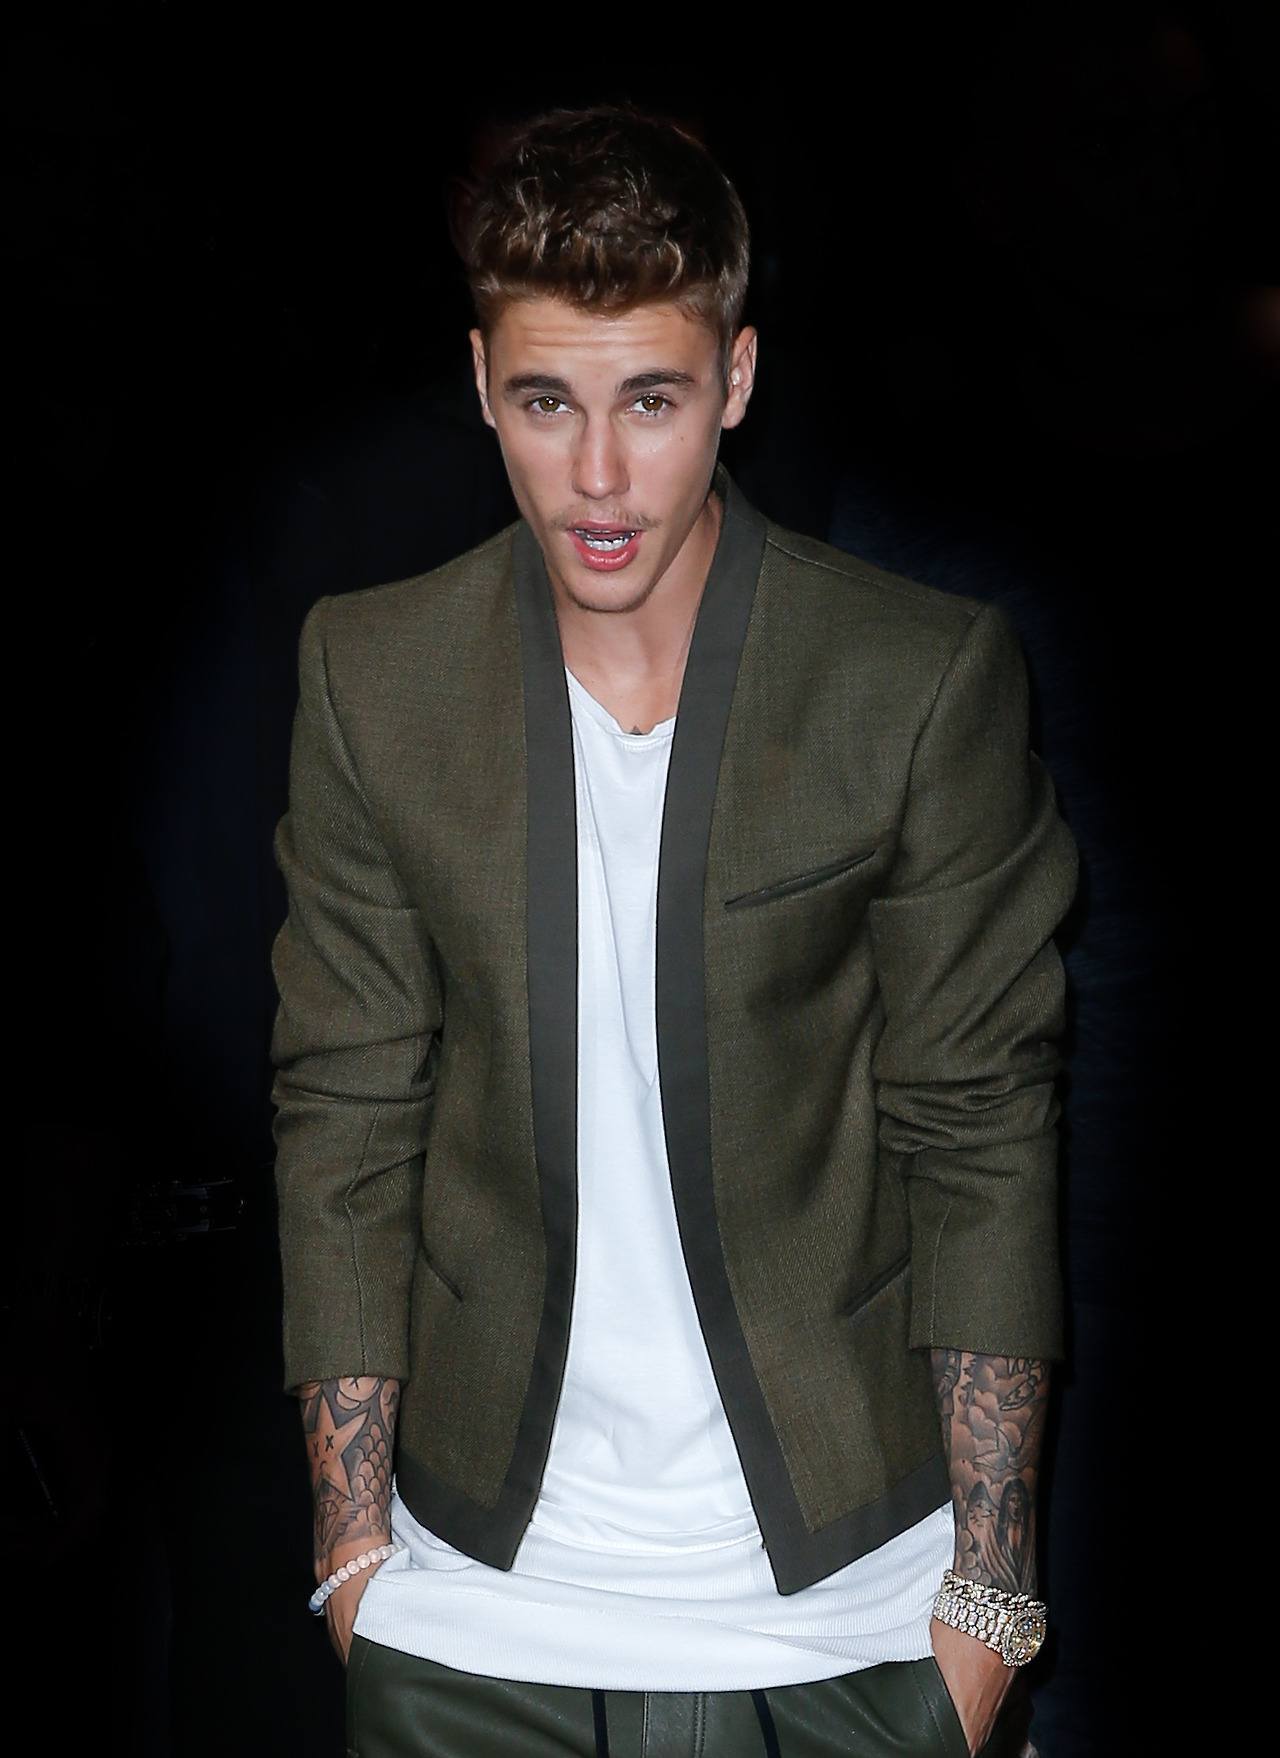 Justin Bieber is seen at the Vogue party in paris